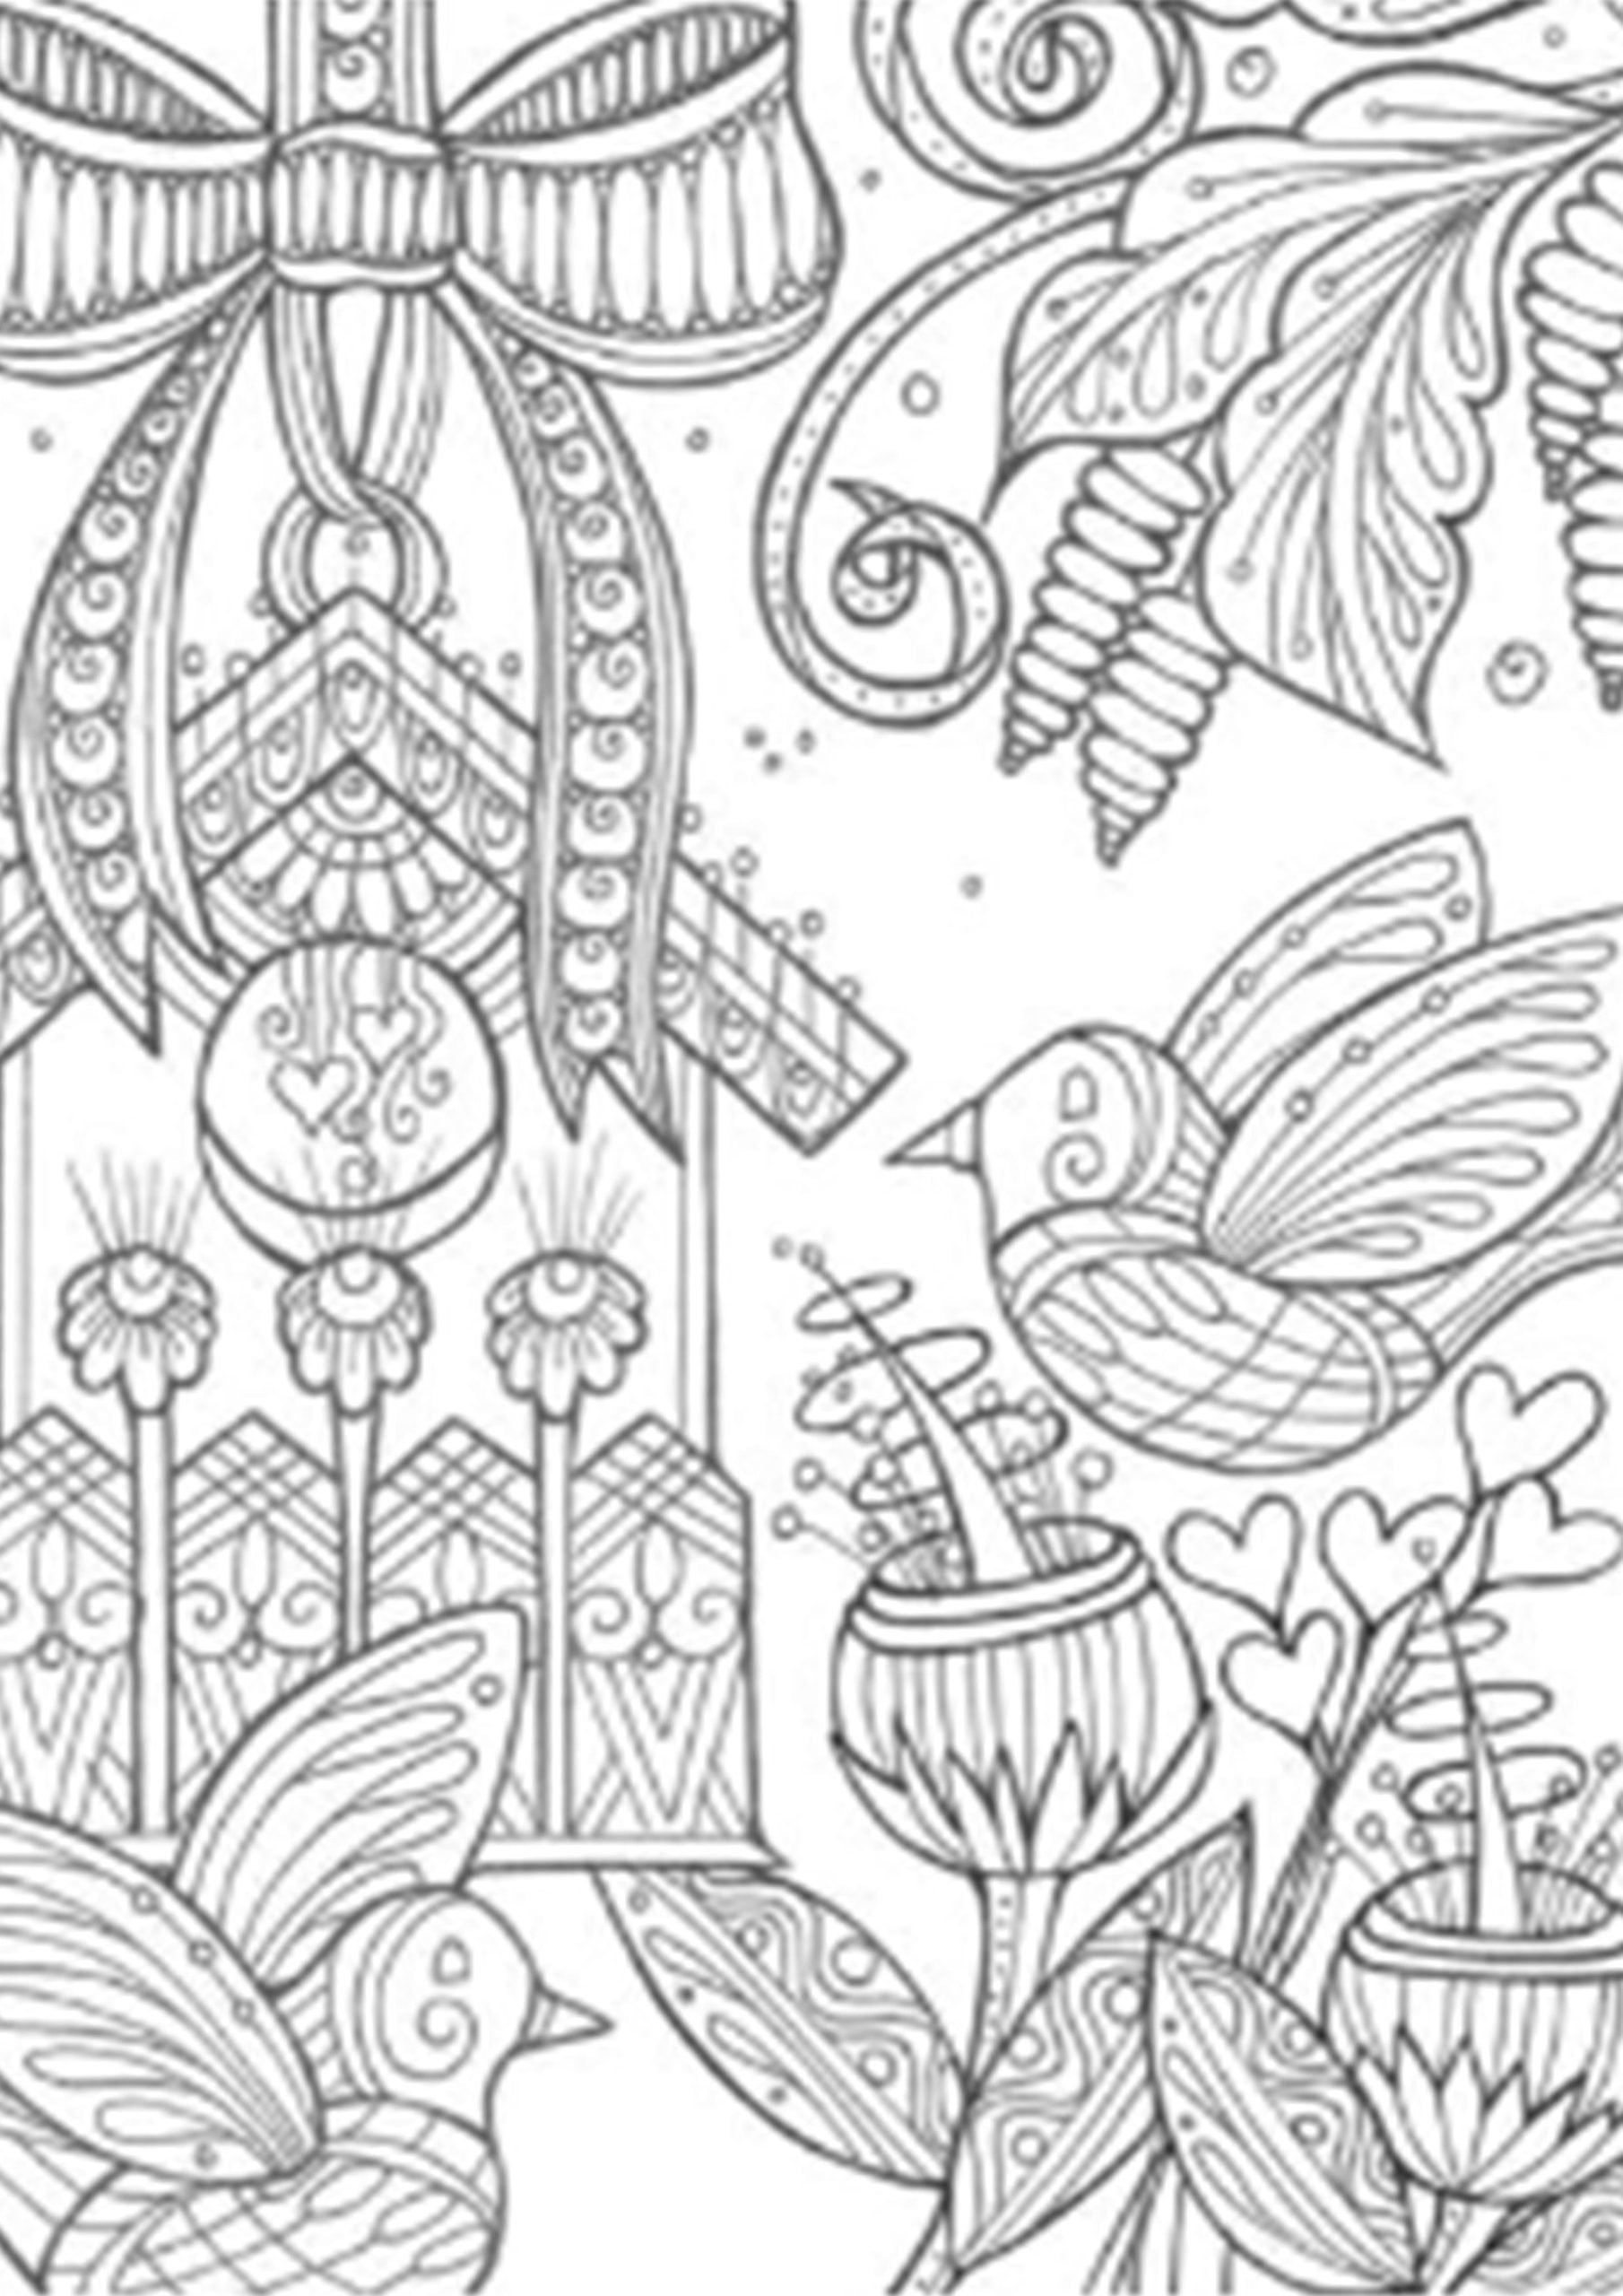 My Favorite Coloring Supplies for Adults - JoDitt Designs